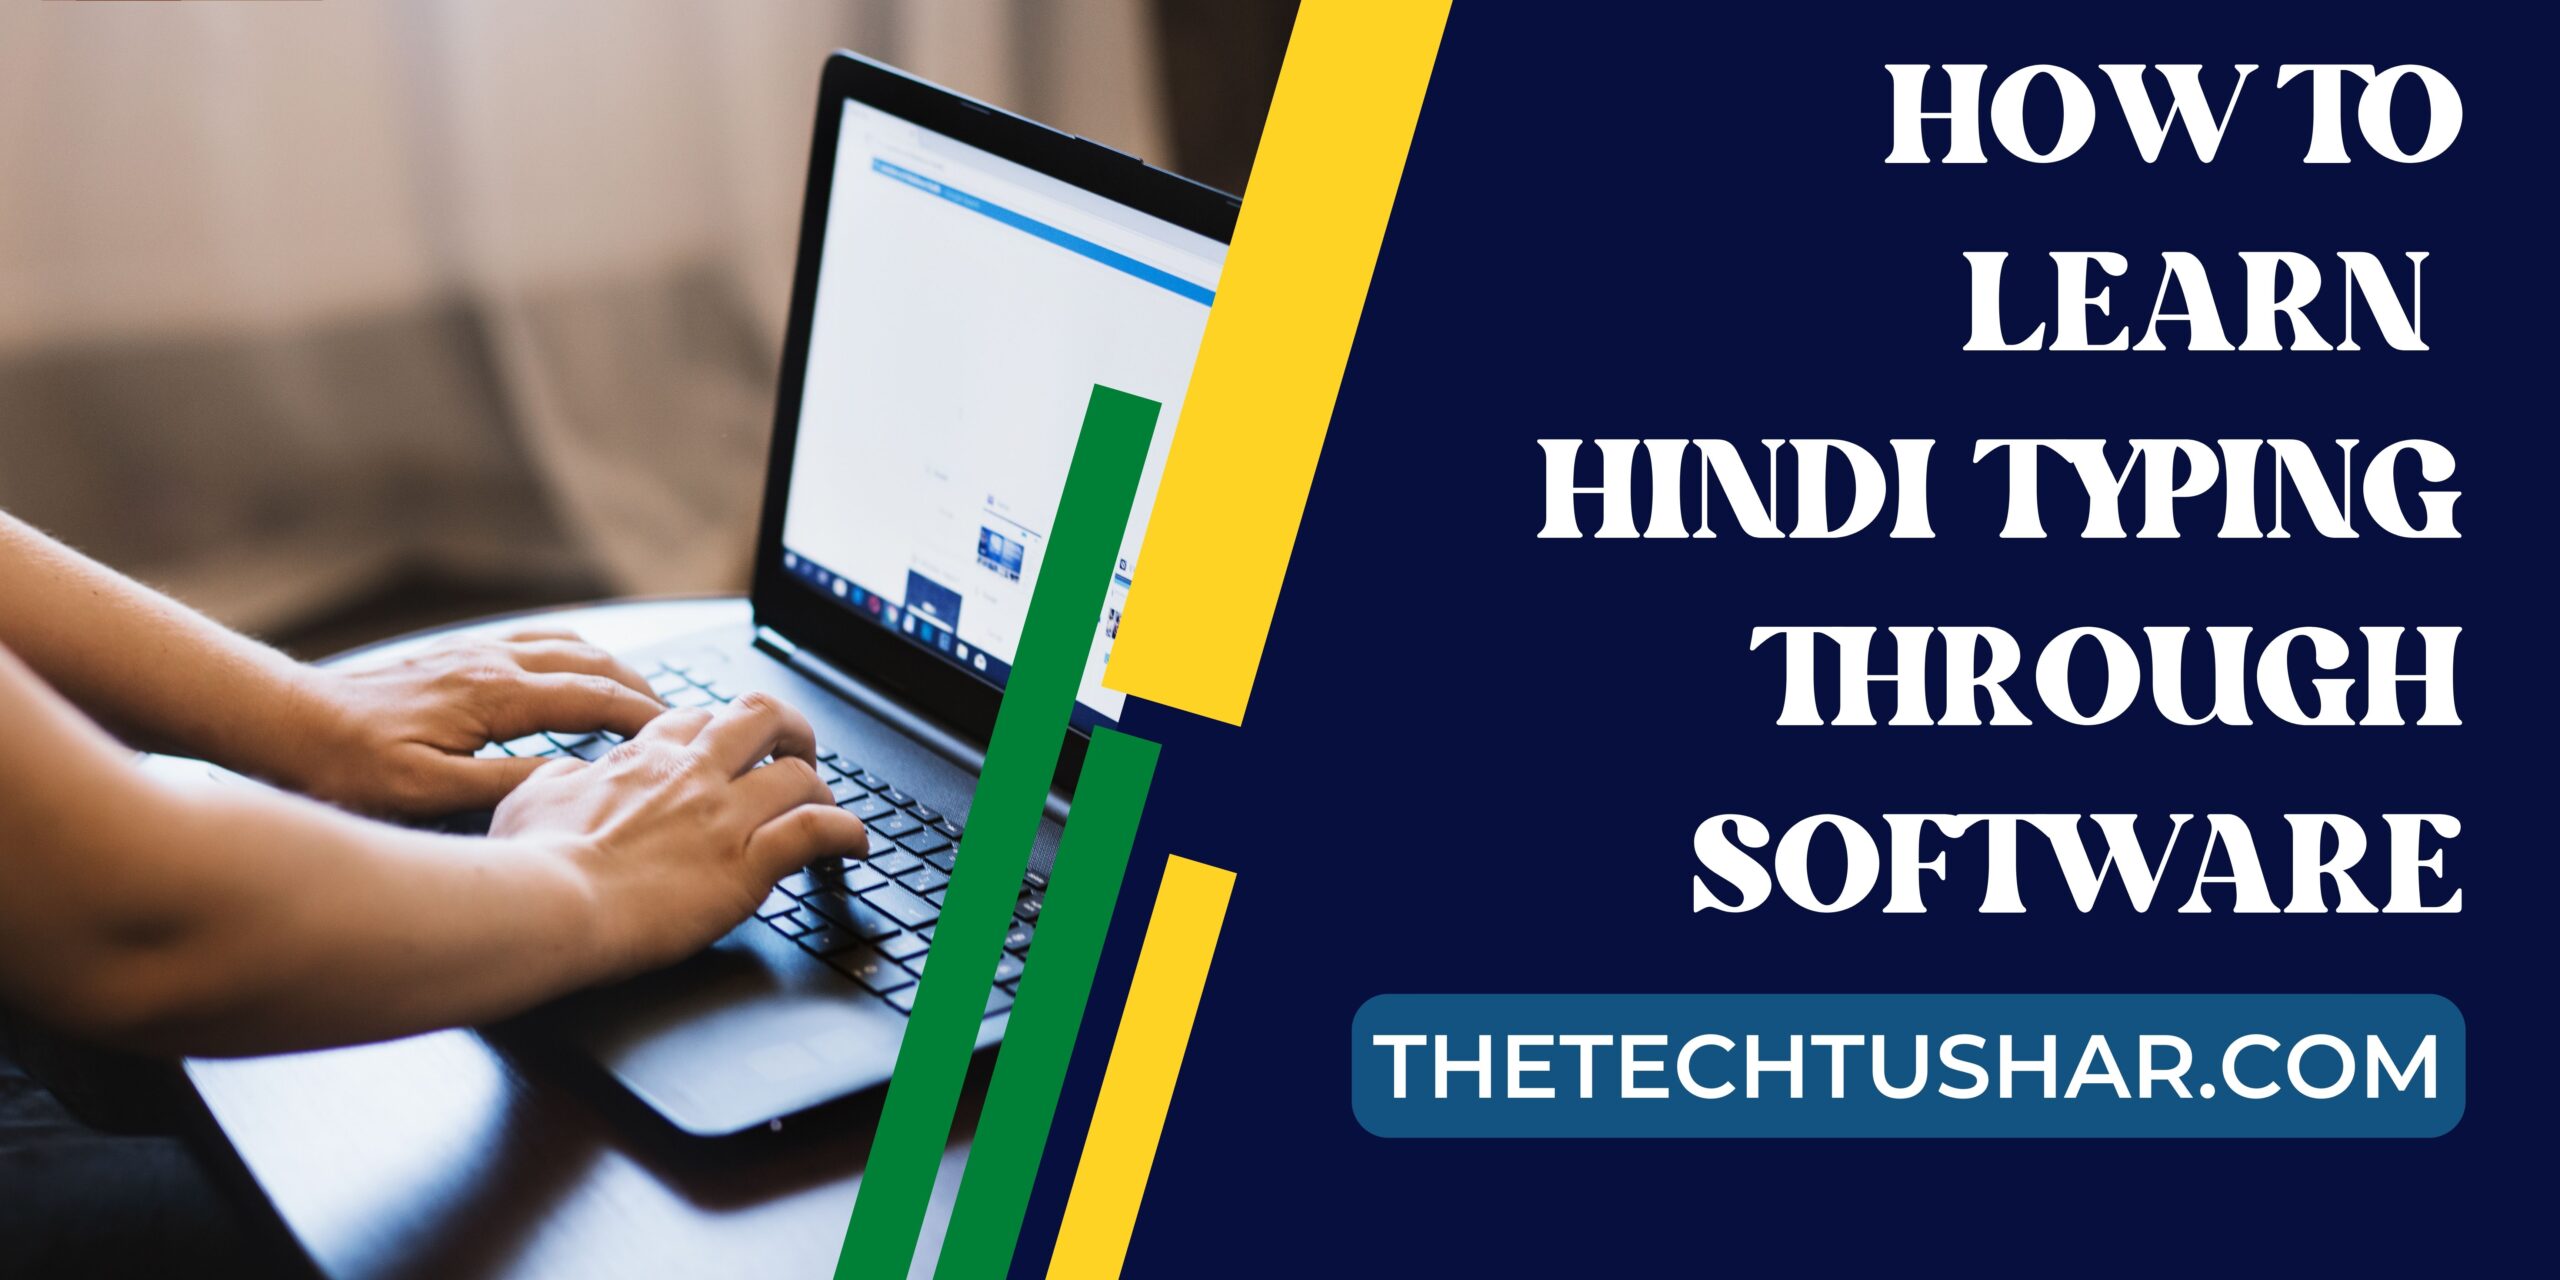 How To Learn Hindi Typing Through Software|How To Learn Hindi Typing Through Software|Tushar|Thetechtushar